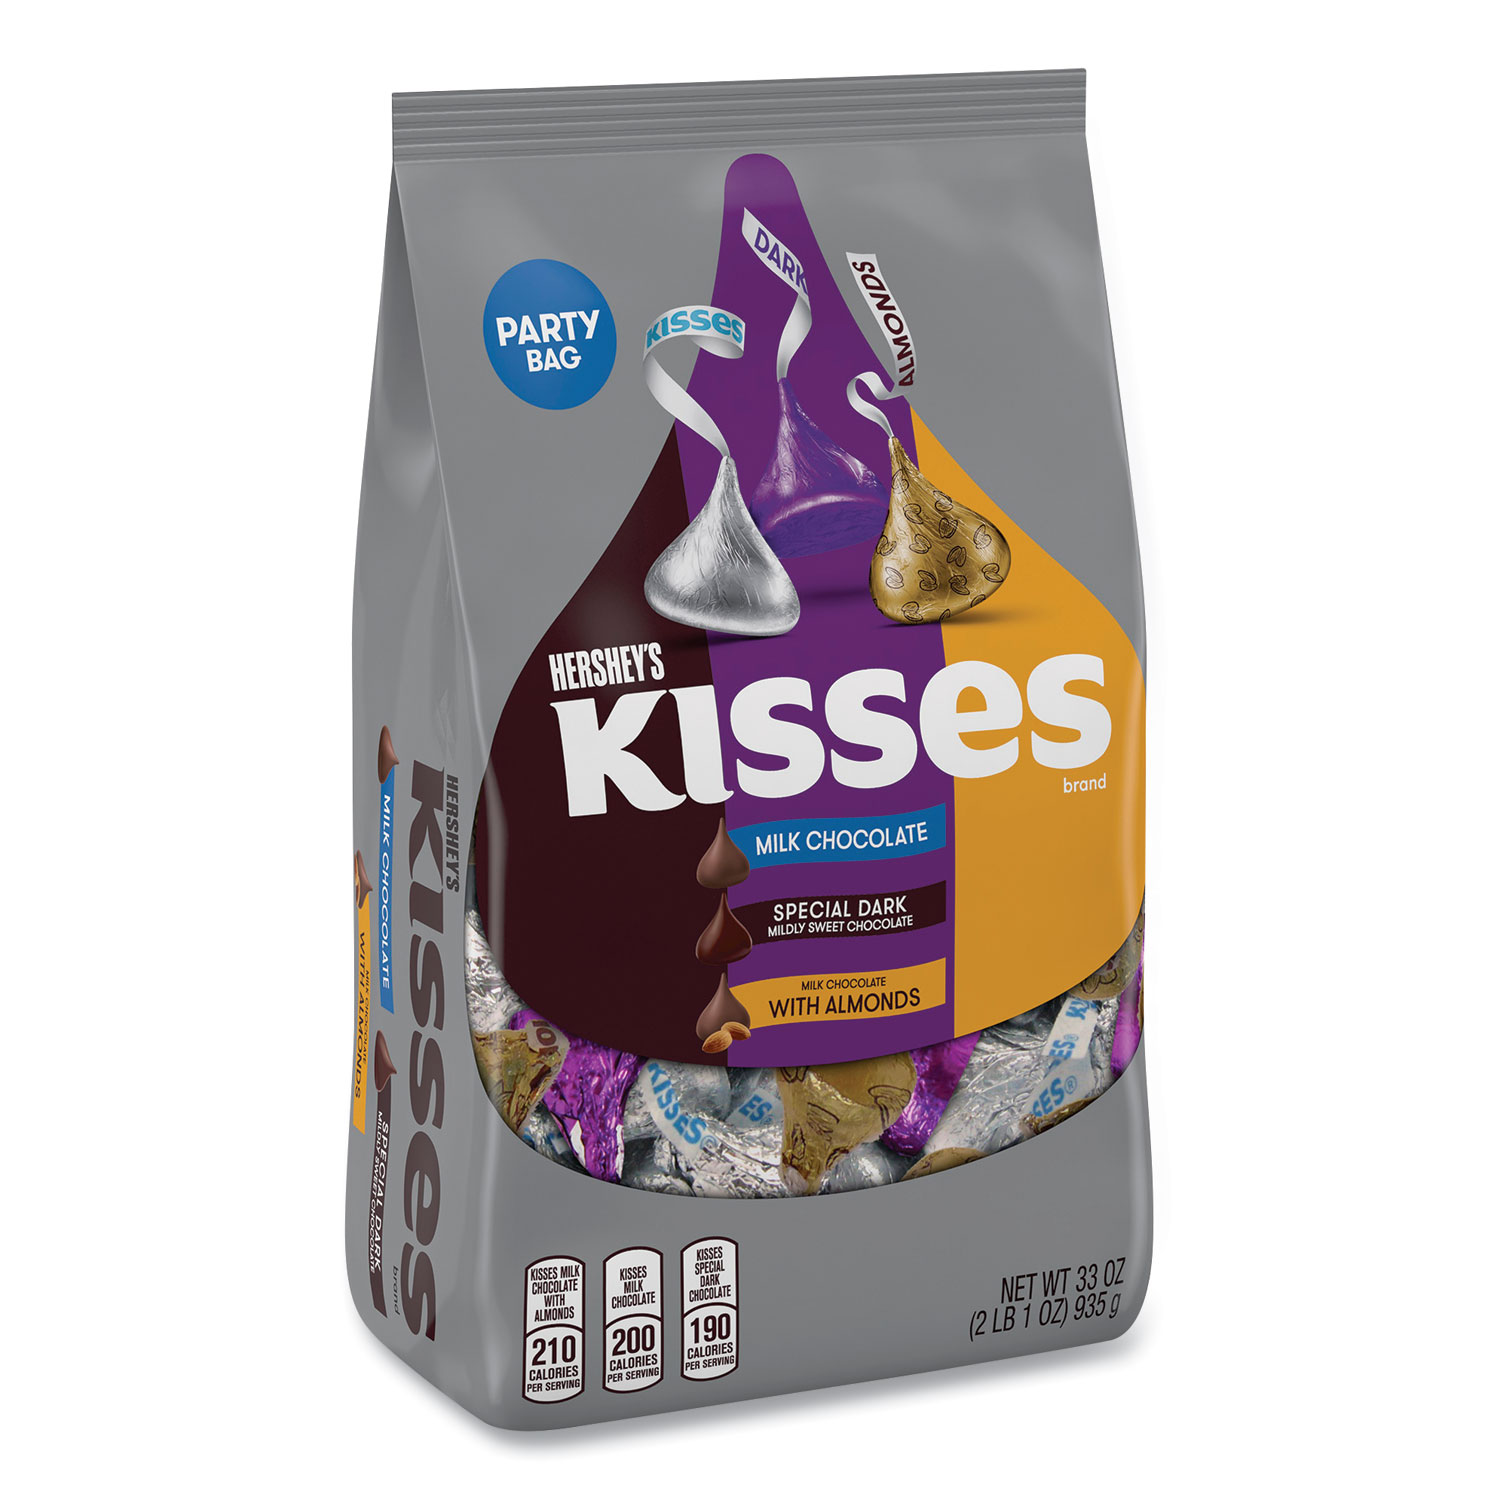  Hershey's 99509 KISSES Party Bag Assortment, 33 oz Bag, Free Delivery in 1-4 Business Days (GRR24600285) 